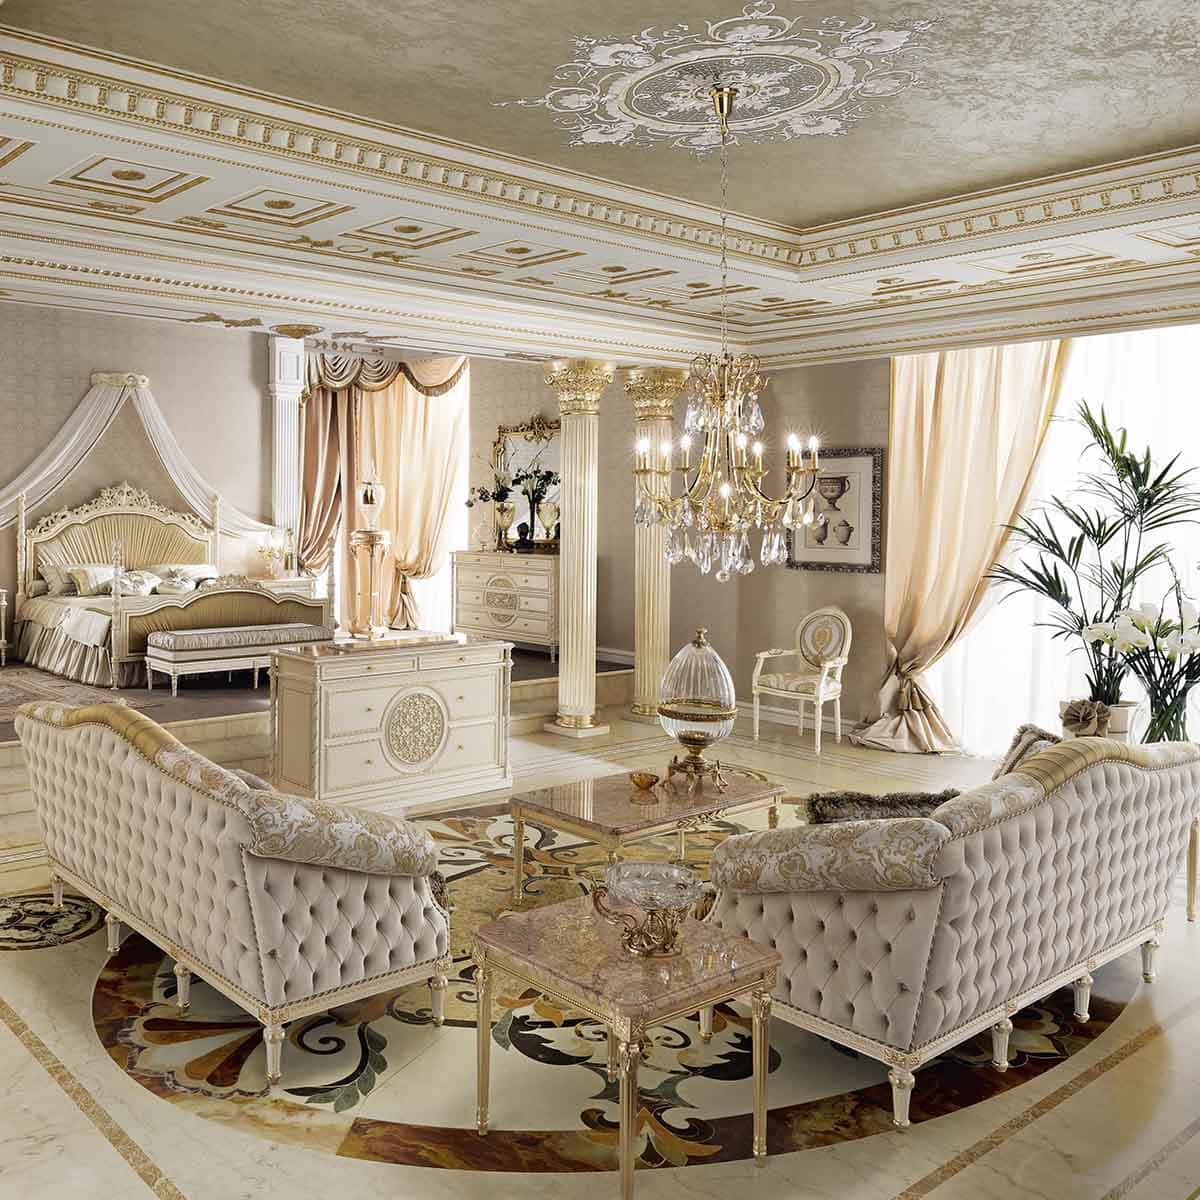 17-master-suite-luxury-exclusive-design-royal-palace-furnishings-solid-wood-custom-made-empire.jpg